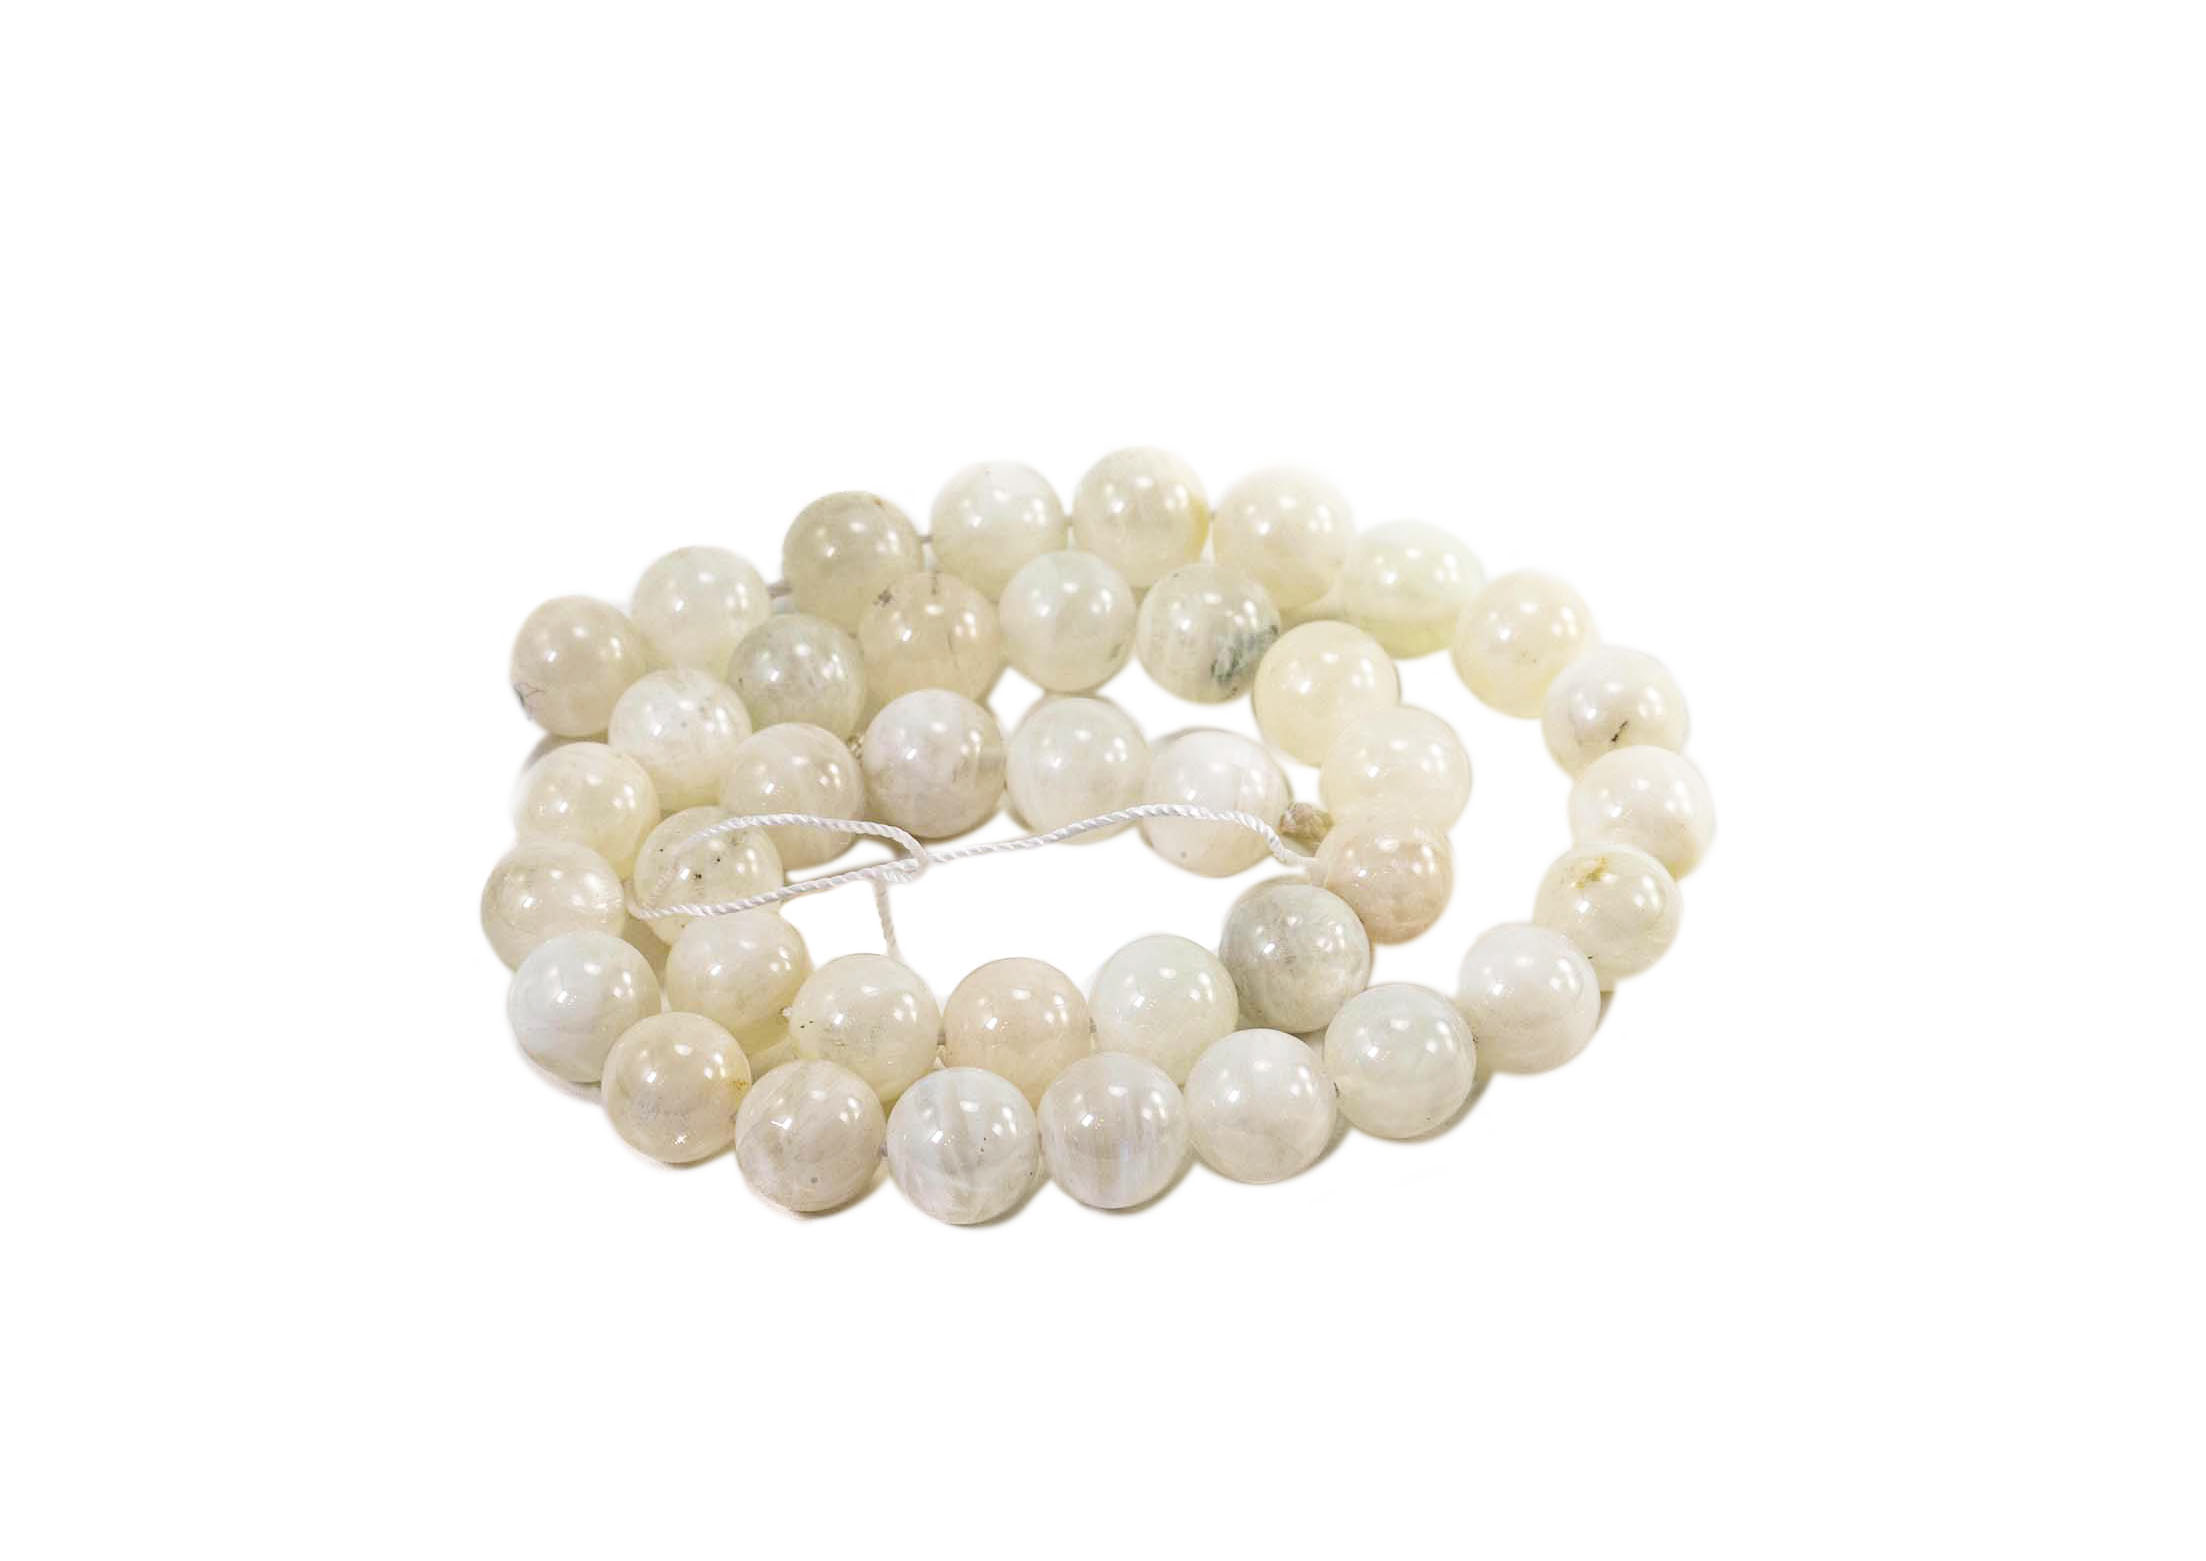 Moonstone Beads (6 mm, 8 mm or 10 mm) - Crystal Dreams World